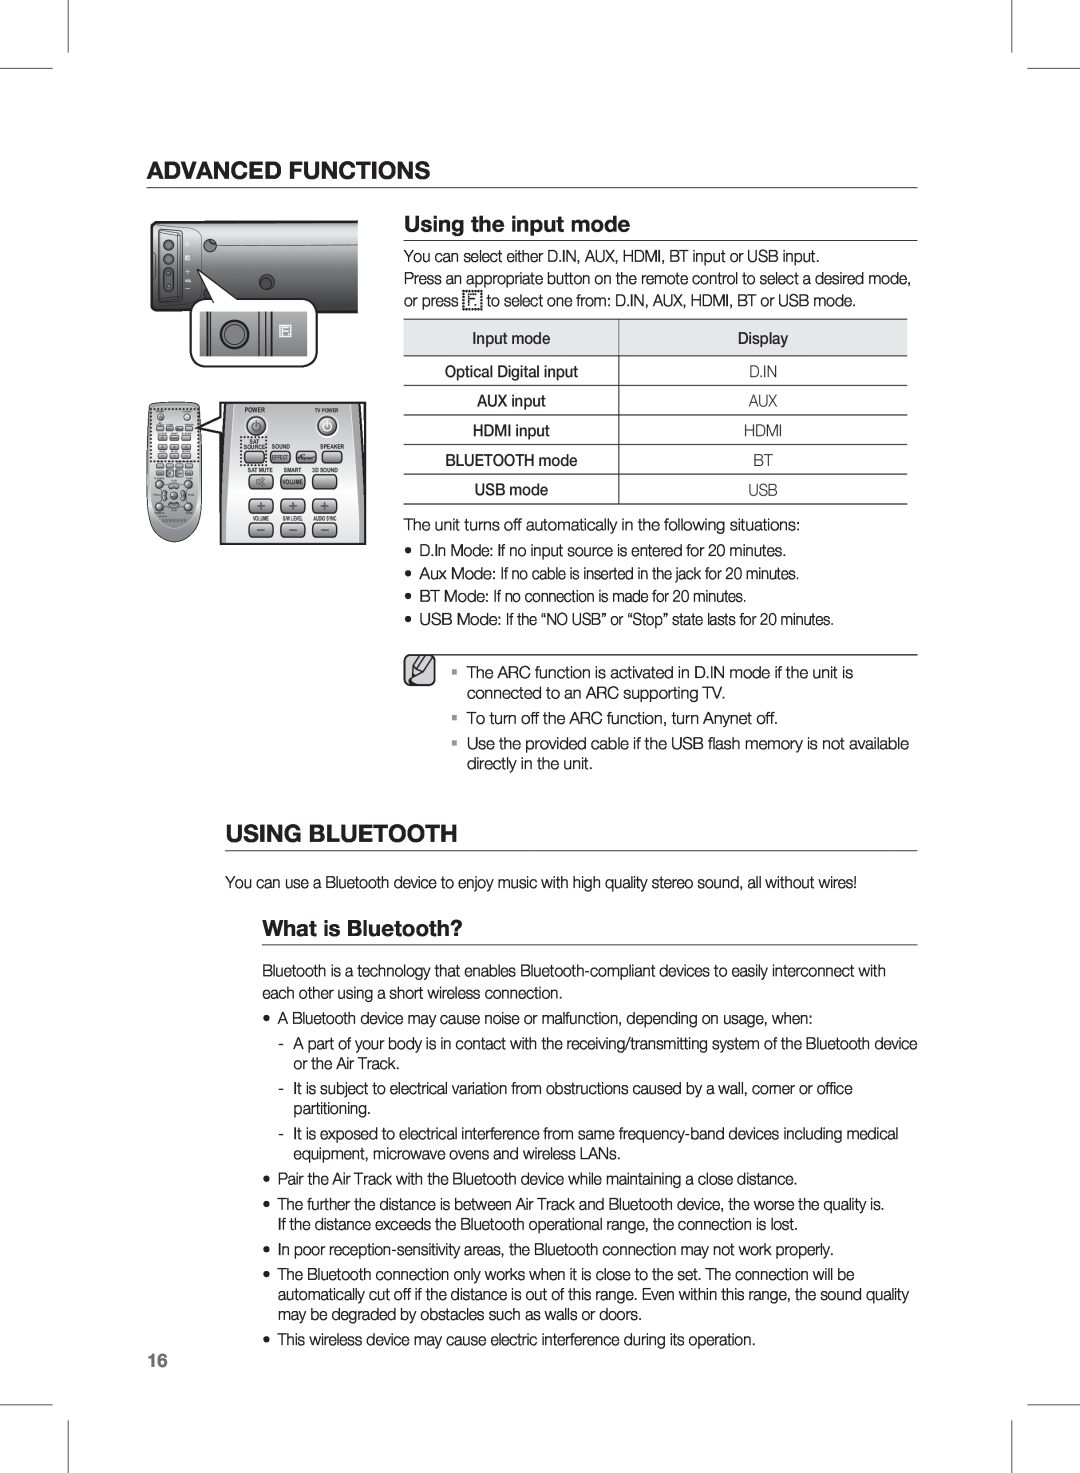 Samsung HW-E450C user manual advanced functions, Using BLUETOOTH, Using the input mode, What is Bluetooth? 